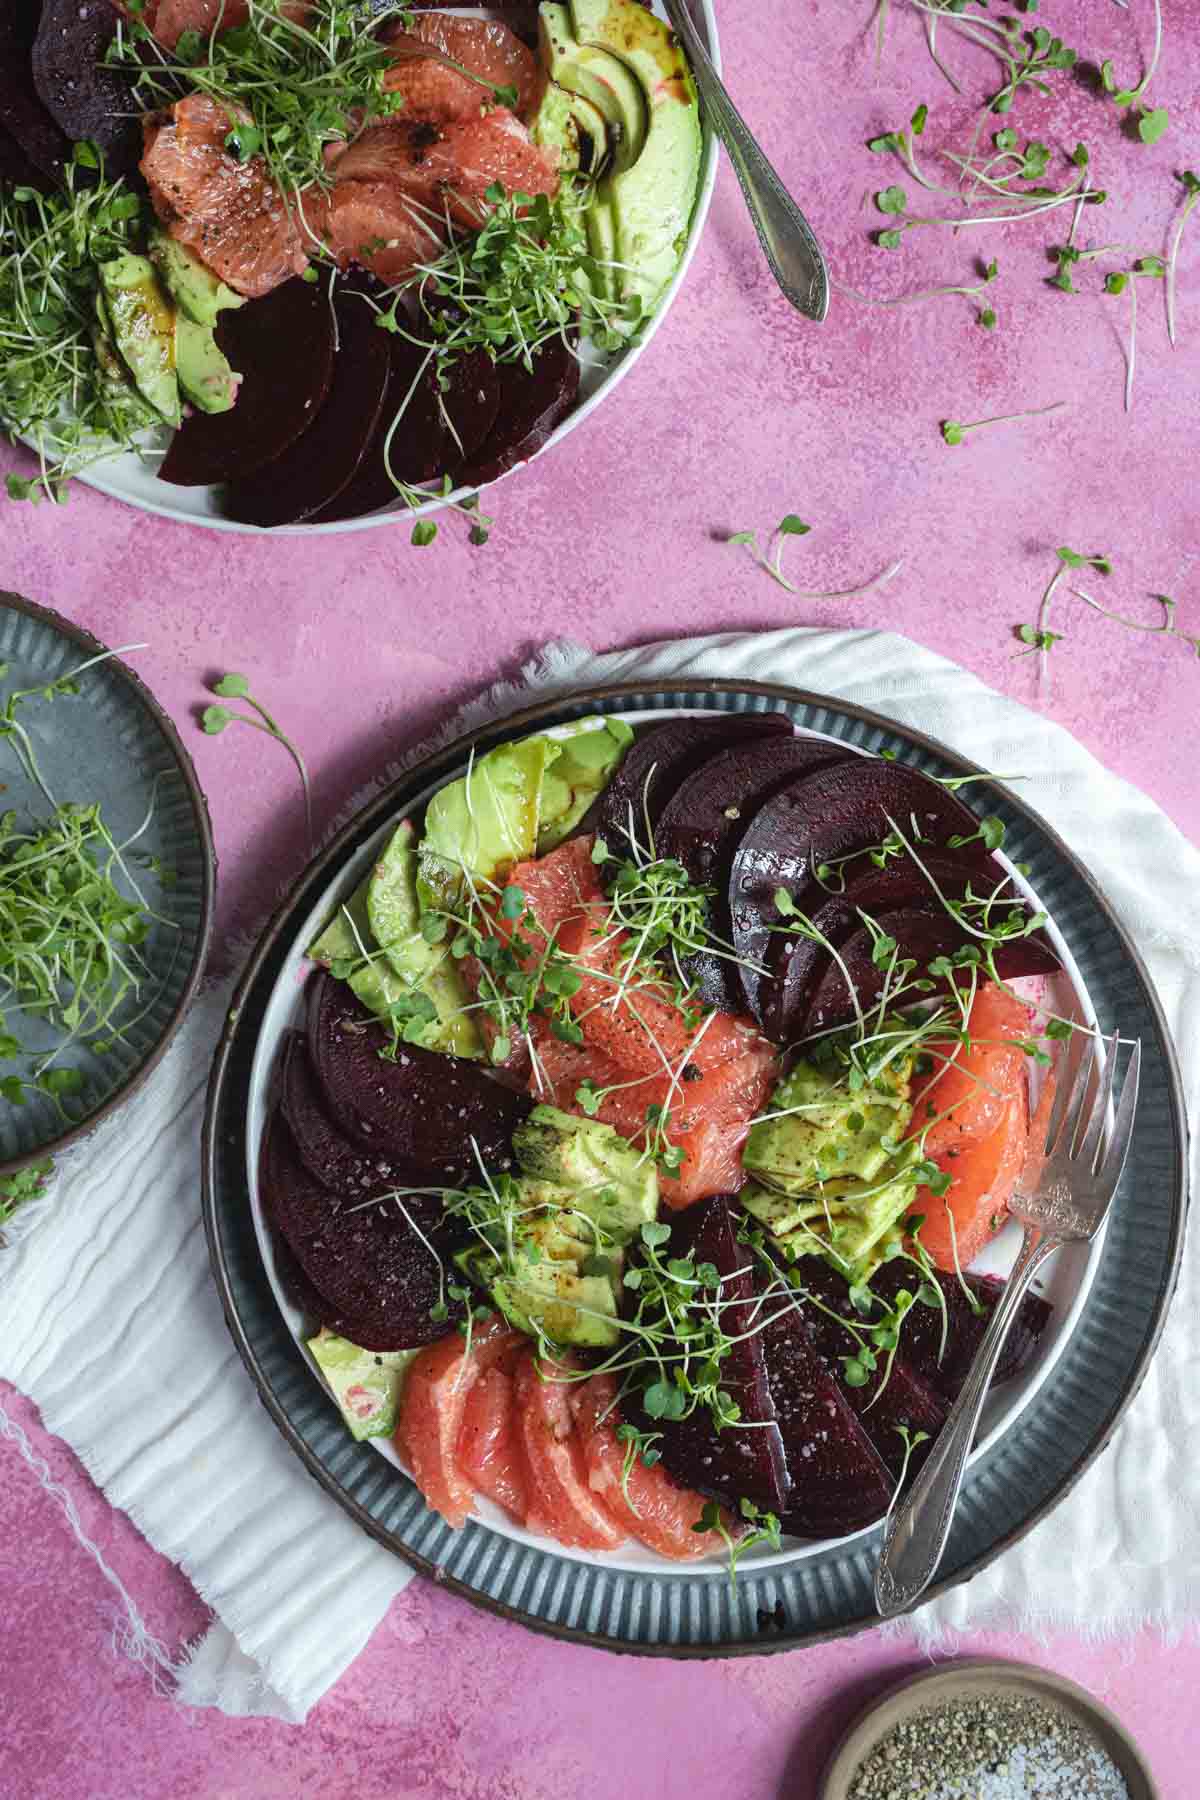 Beet salad on a plate with grapefruit and microgreens.